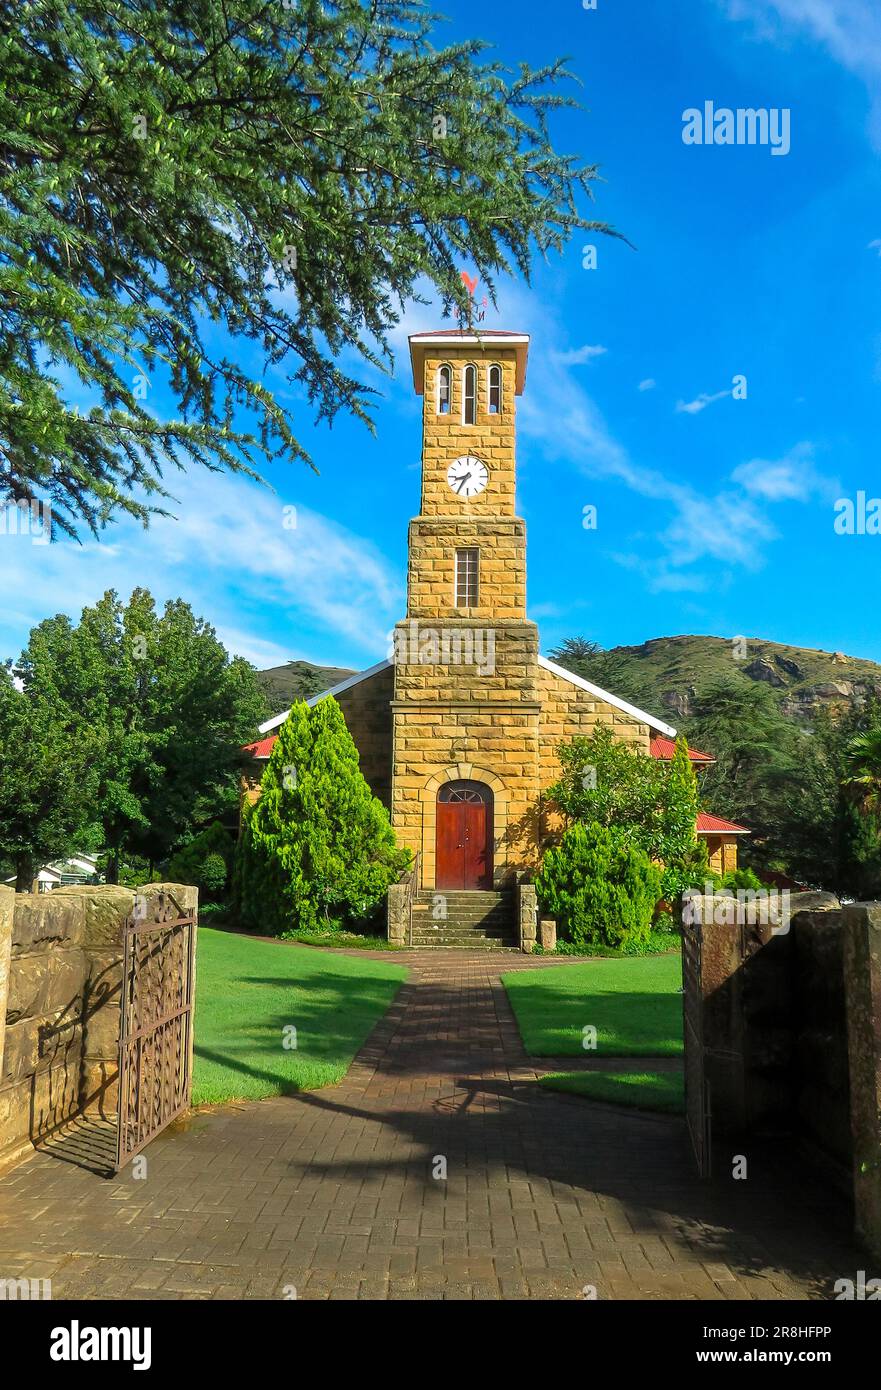 NG Church, Bester Street, Clarens, Free State Stock Photo